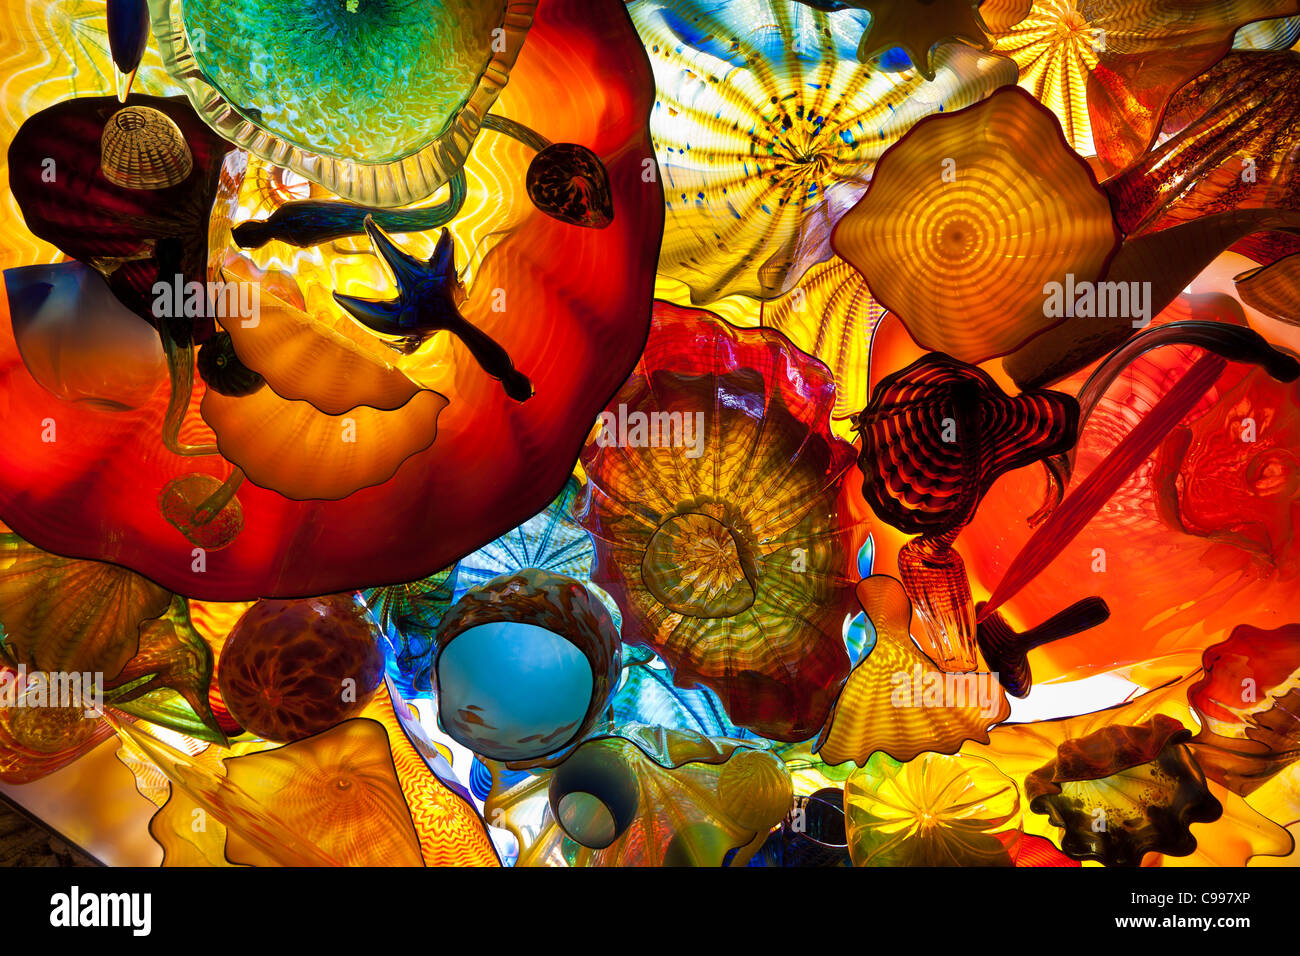 Dale Chihuly glass ceiling sculptures at the Franklin Park Conservatory in Columbus, Ohio. Stock Photo